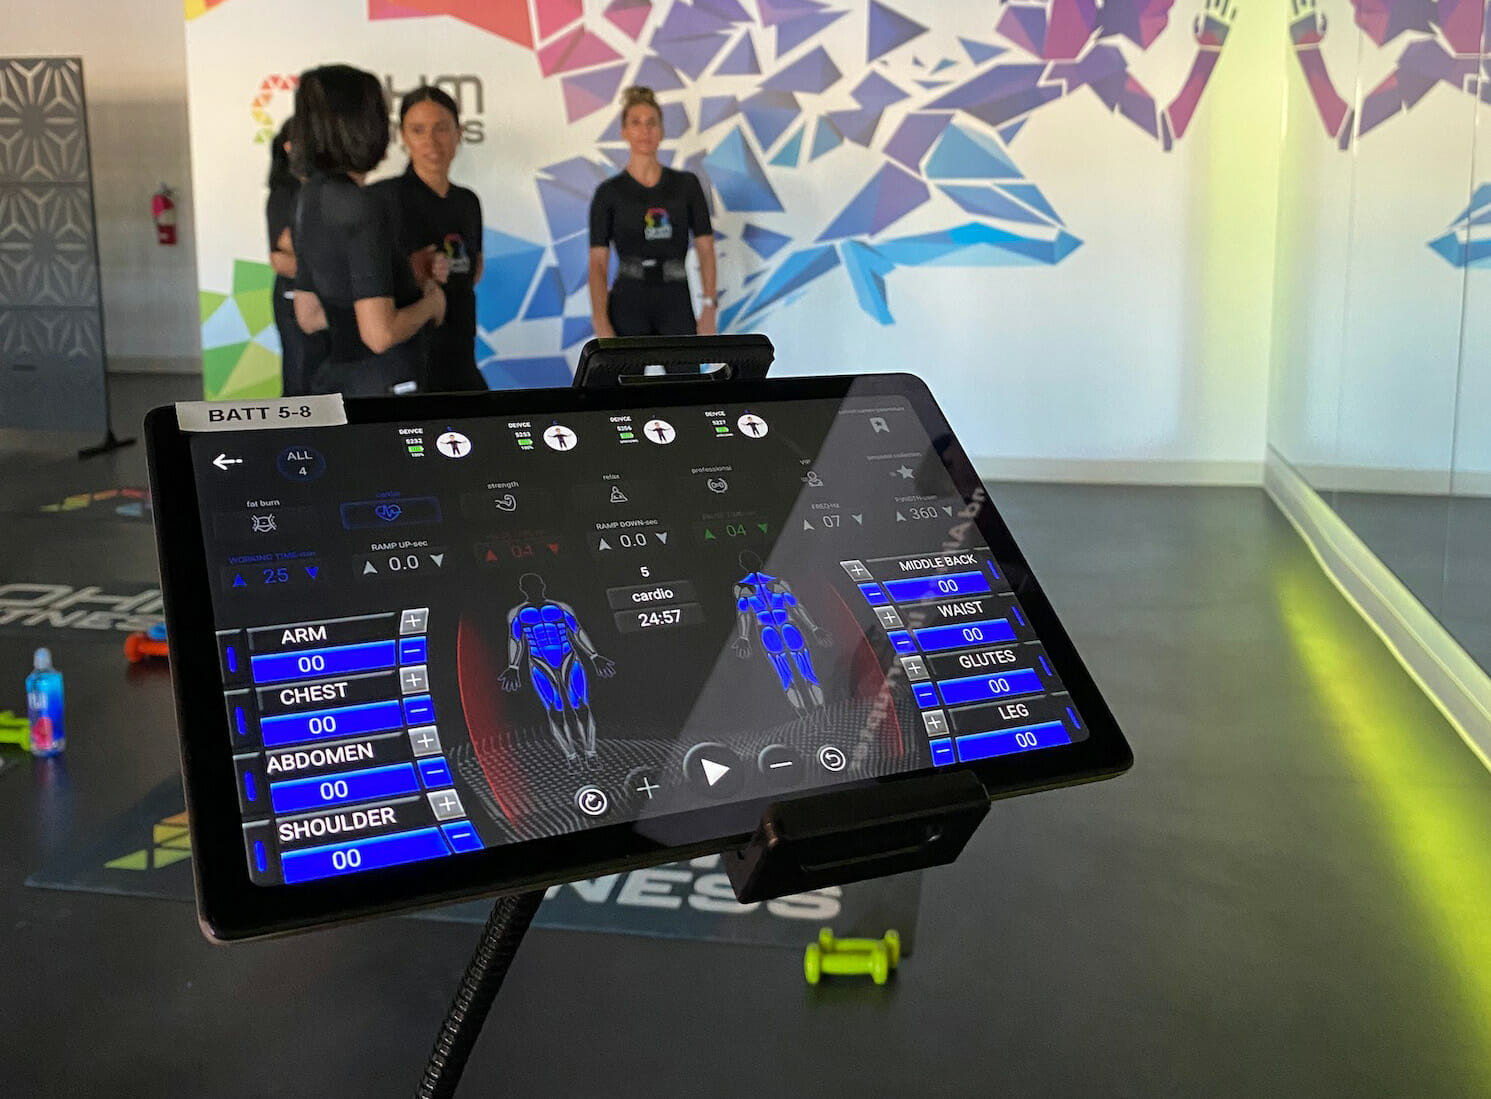 Future of Fitness: OHM Fitness to Open 35 EMS Locations in New Jersey &  Washington, D.C. - Athletech News